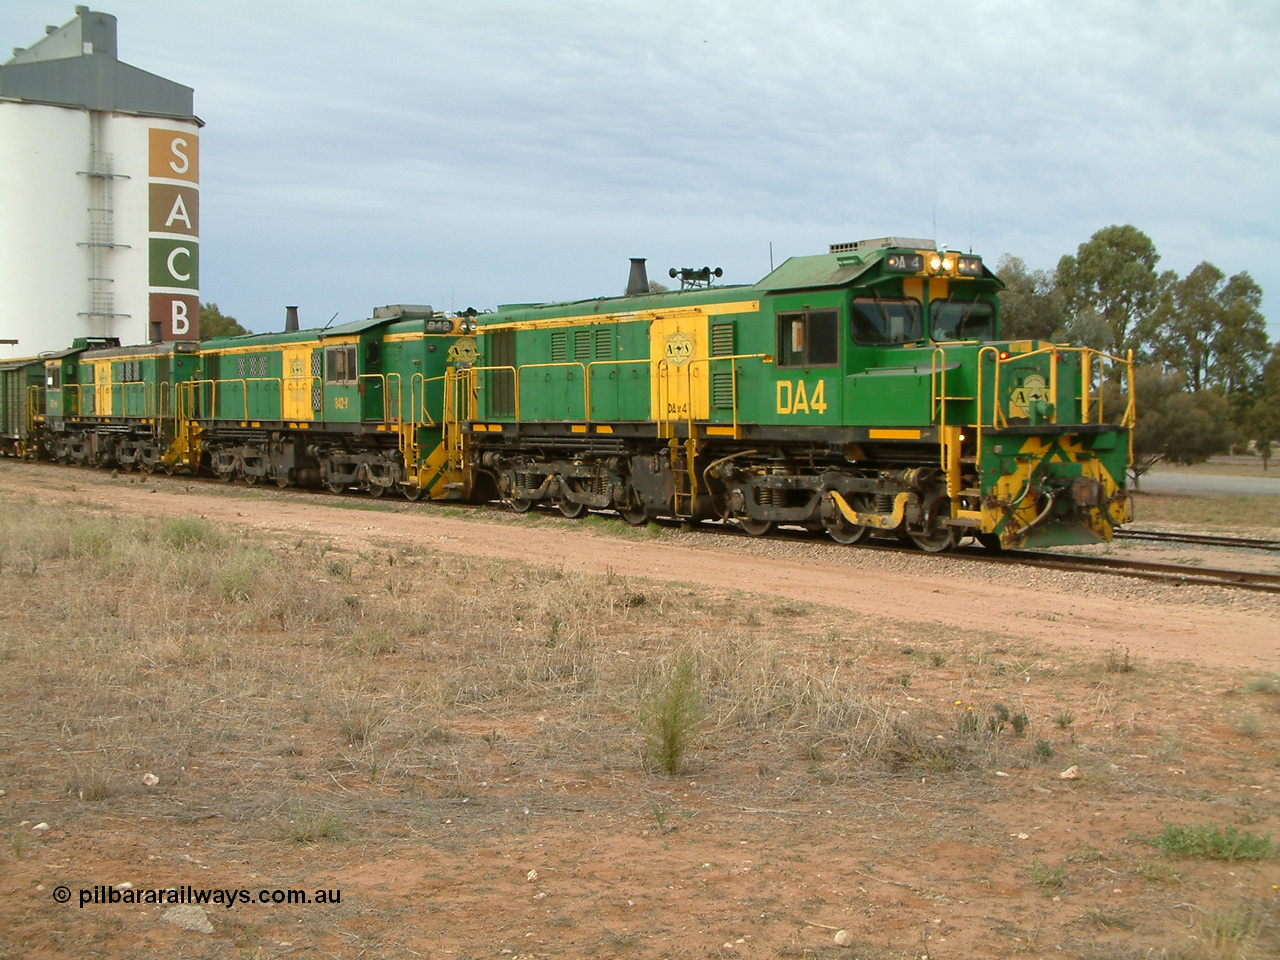 030407 082237
Wudinna, empty grain train behind a trio of former Australian National locomotives with rebuilt former AE Goodwin ALCo model DL531 830 class ex 839, serial 83730, rebuilt by Port Augusta Workshops to DA class, DA 4 leading two AE Goodwin ALCo model DL531 830 class units 842, serial 84140 and 851 serial 84137, 851 having been on the Eyre Peninsula since delivered in 1962, to shunt off empty waggons into the grain siding. 7th April 2003.
Keywords: DA-class;DA4;83730;Port-Augusta-WS;ALCo;DL531G/1;830-class;839;rebuild;